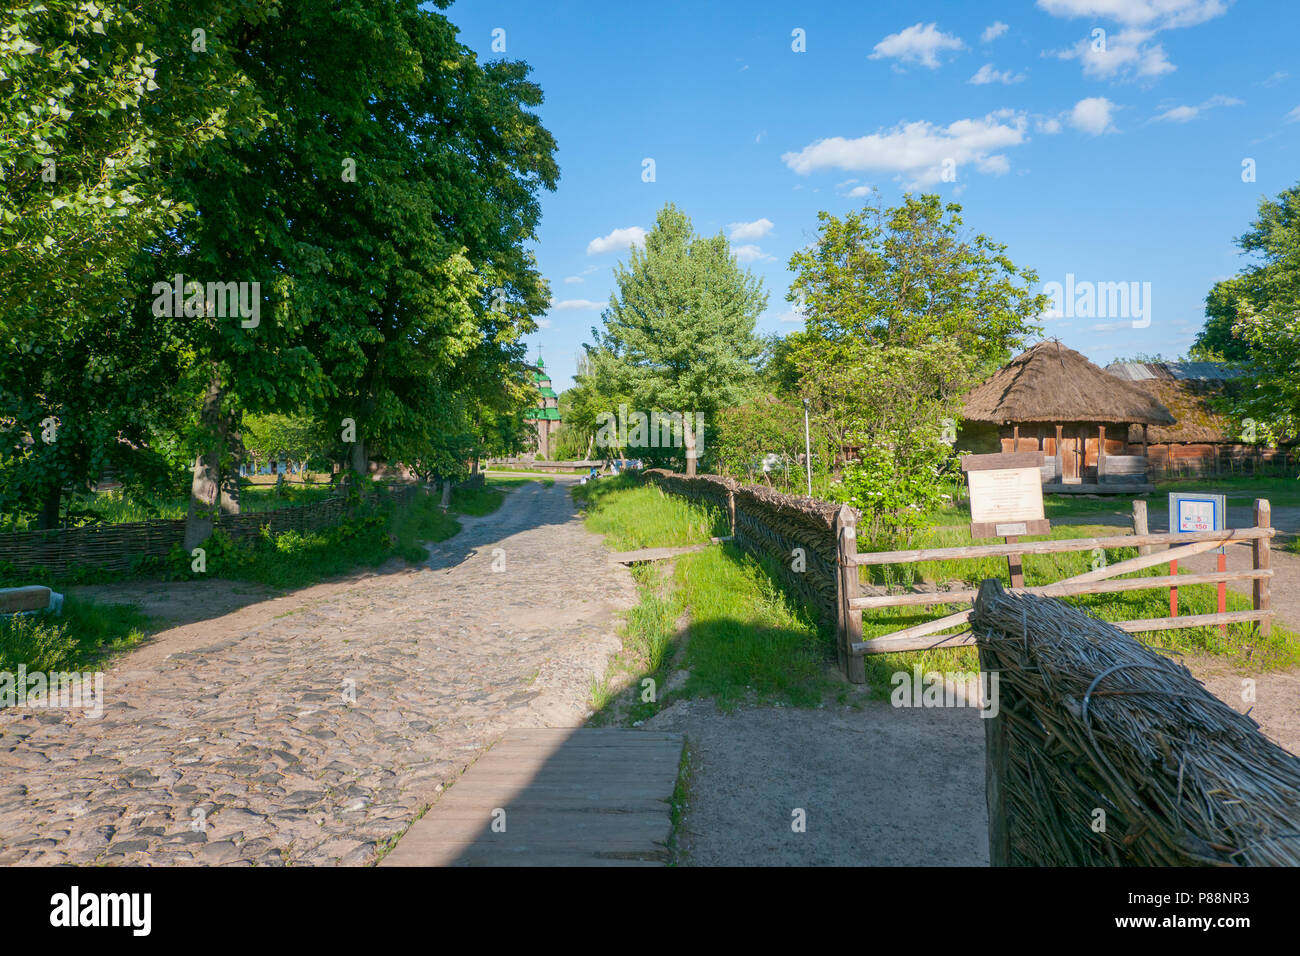 An ancient rural street with a road paved with cobblestones with wooden houses standing in courtyards fenced with a wattle fence with tall trees growi Stock Photo